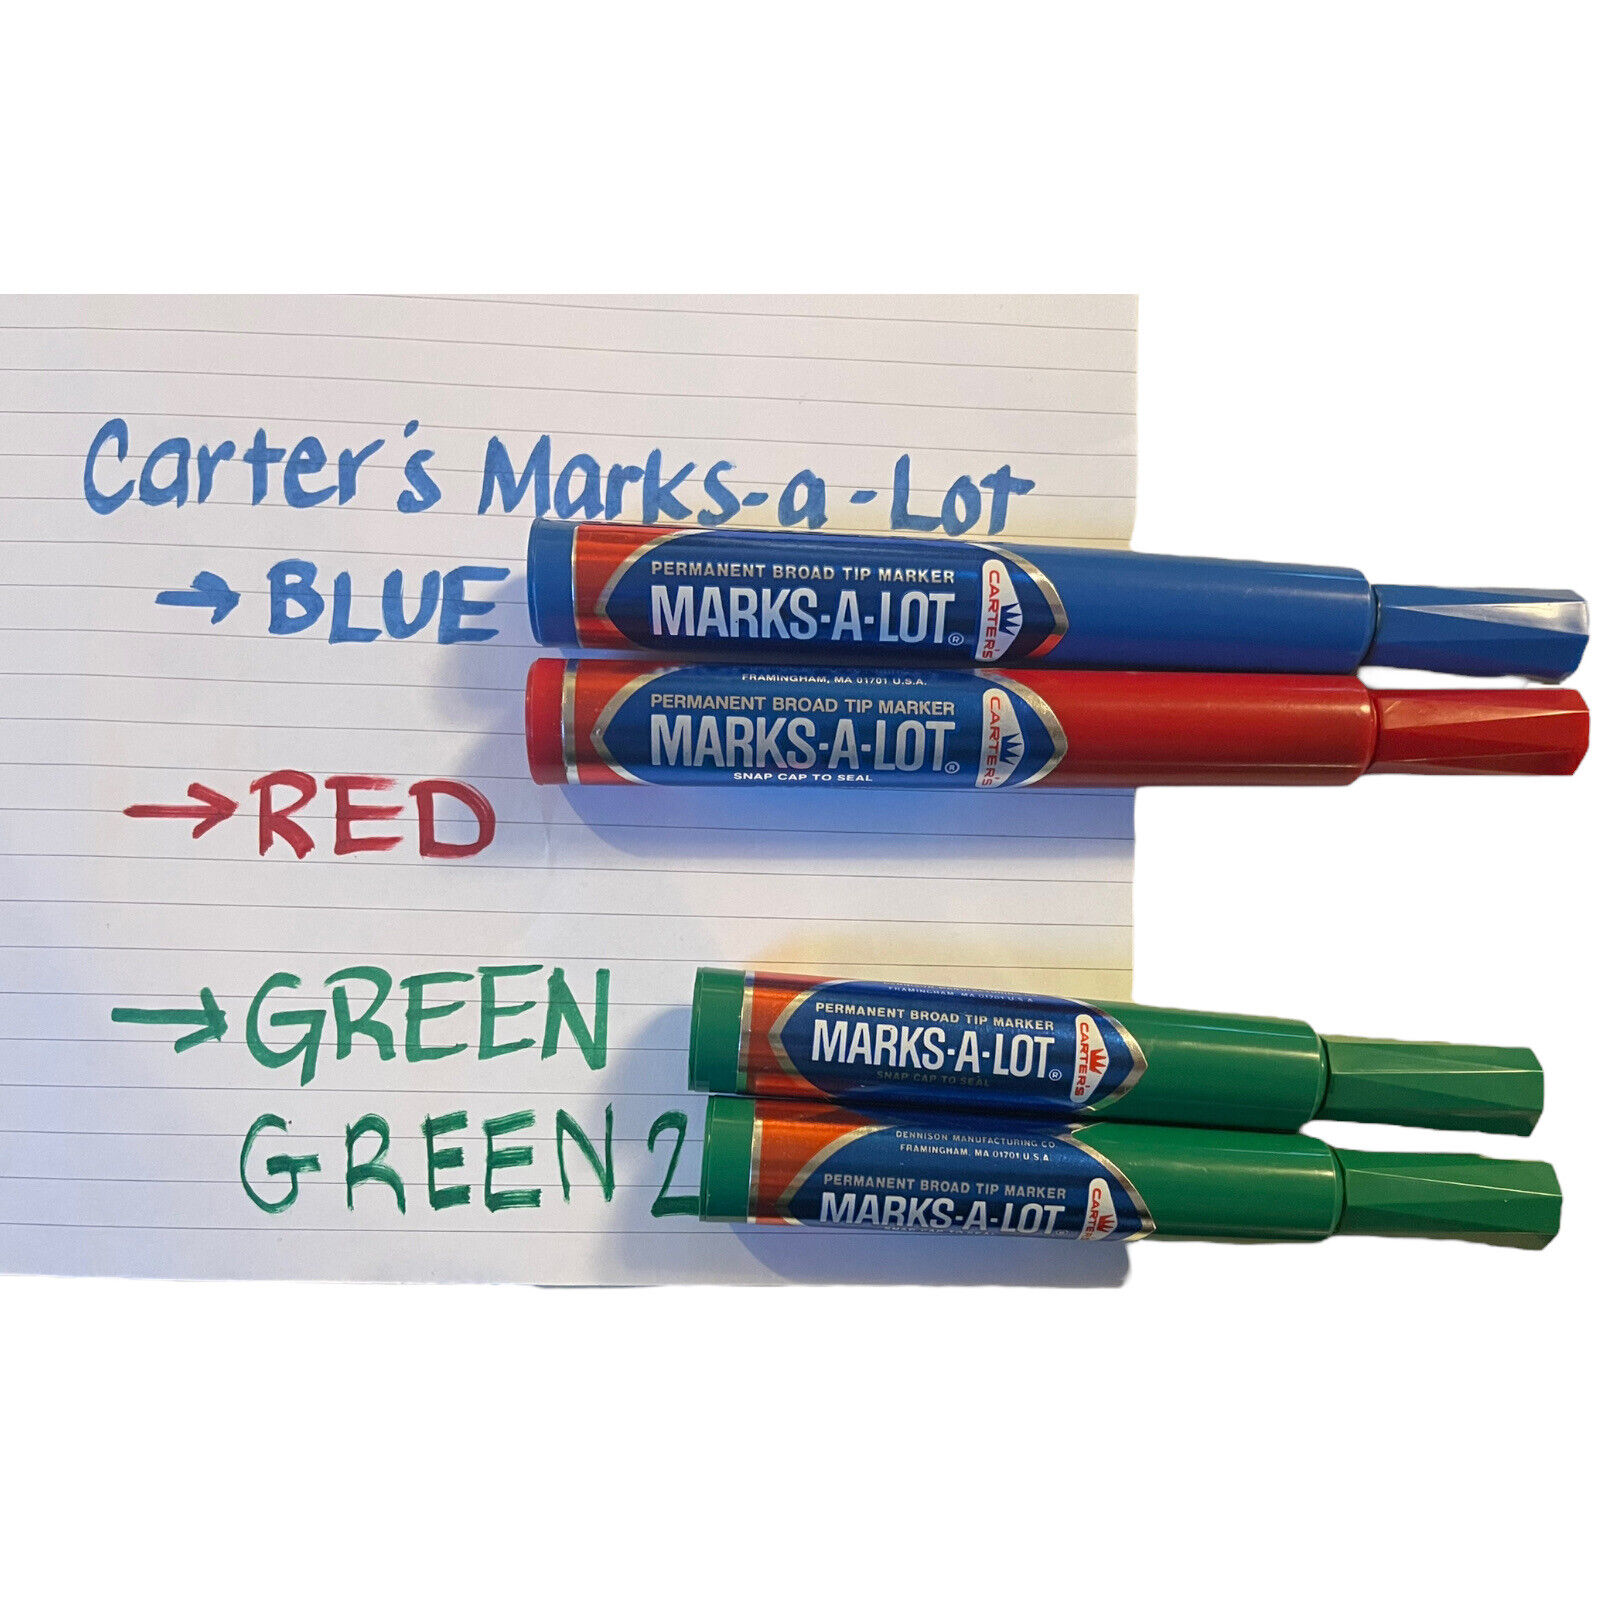 (4)  Carter’s MARKS-A-LOT Blue Red (2) Green Broad Tip Permanent Markers Vintage